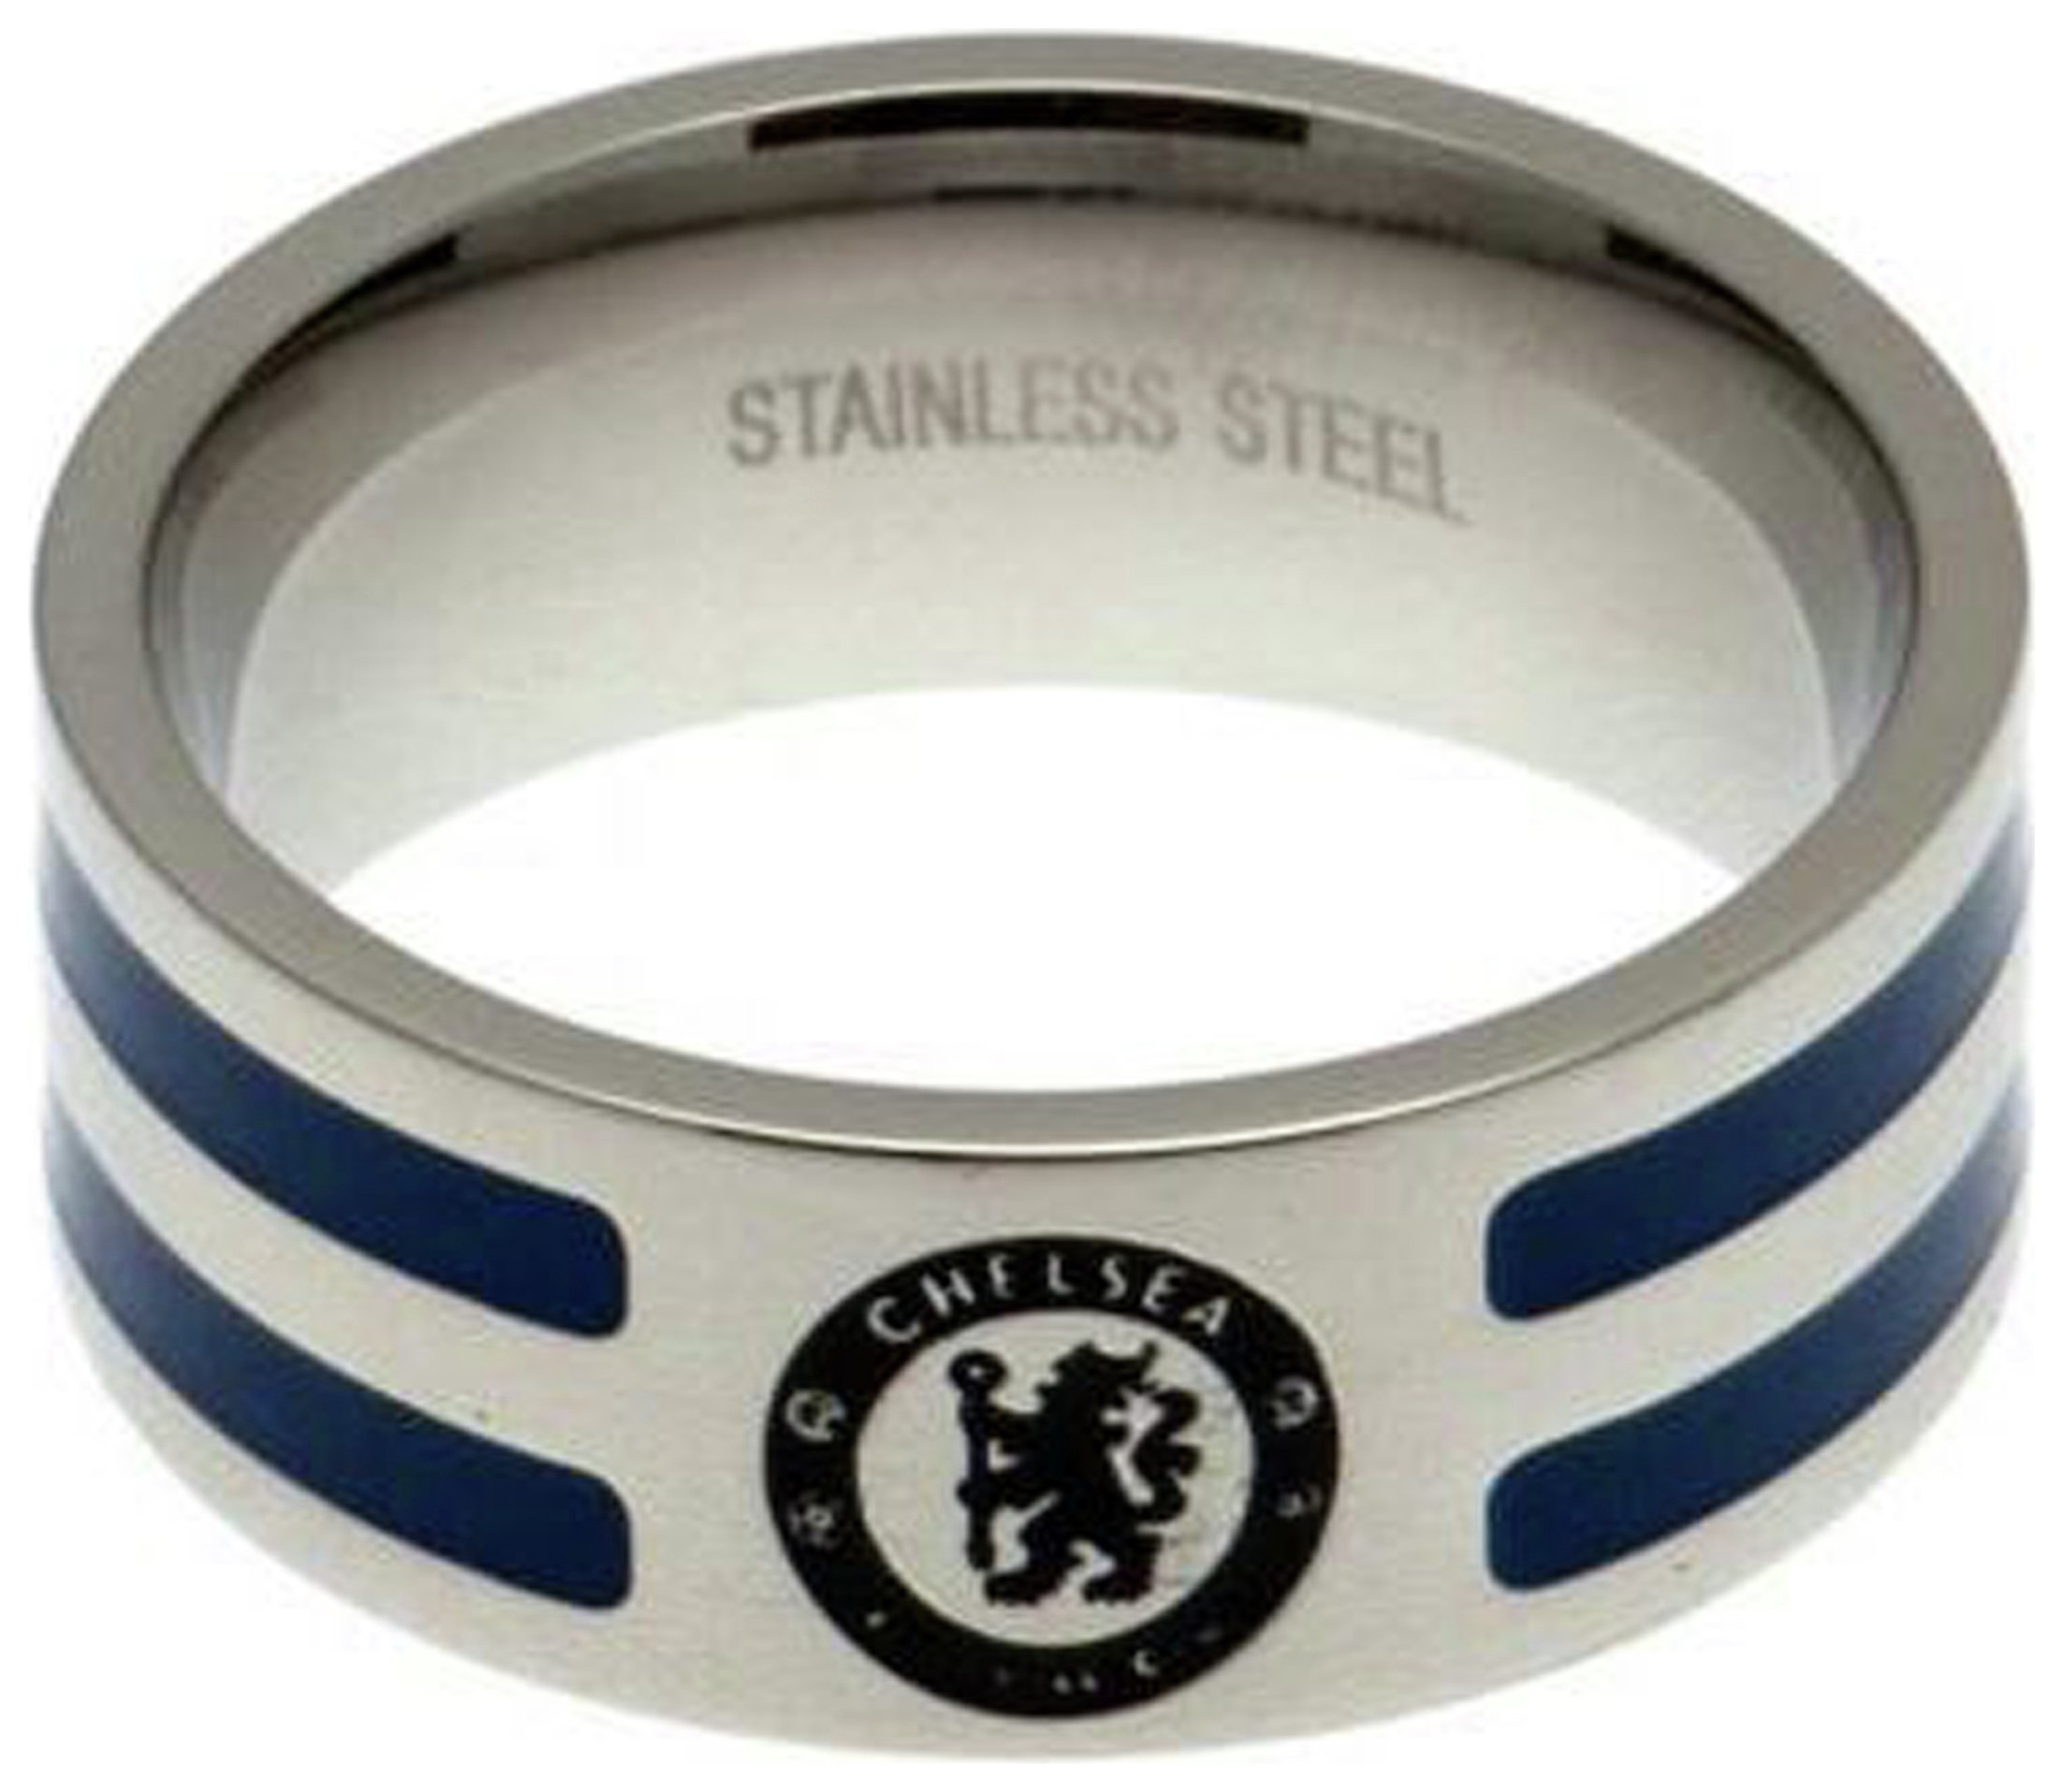 Stainless Steel Chelsea Striped Ring review